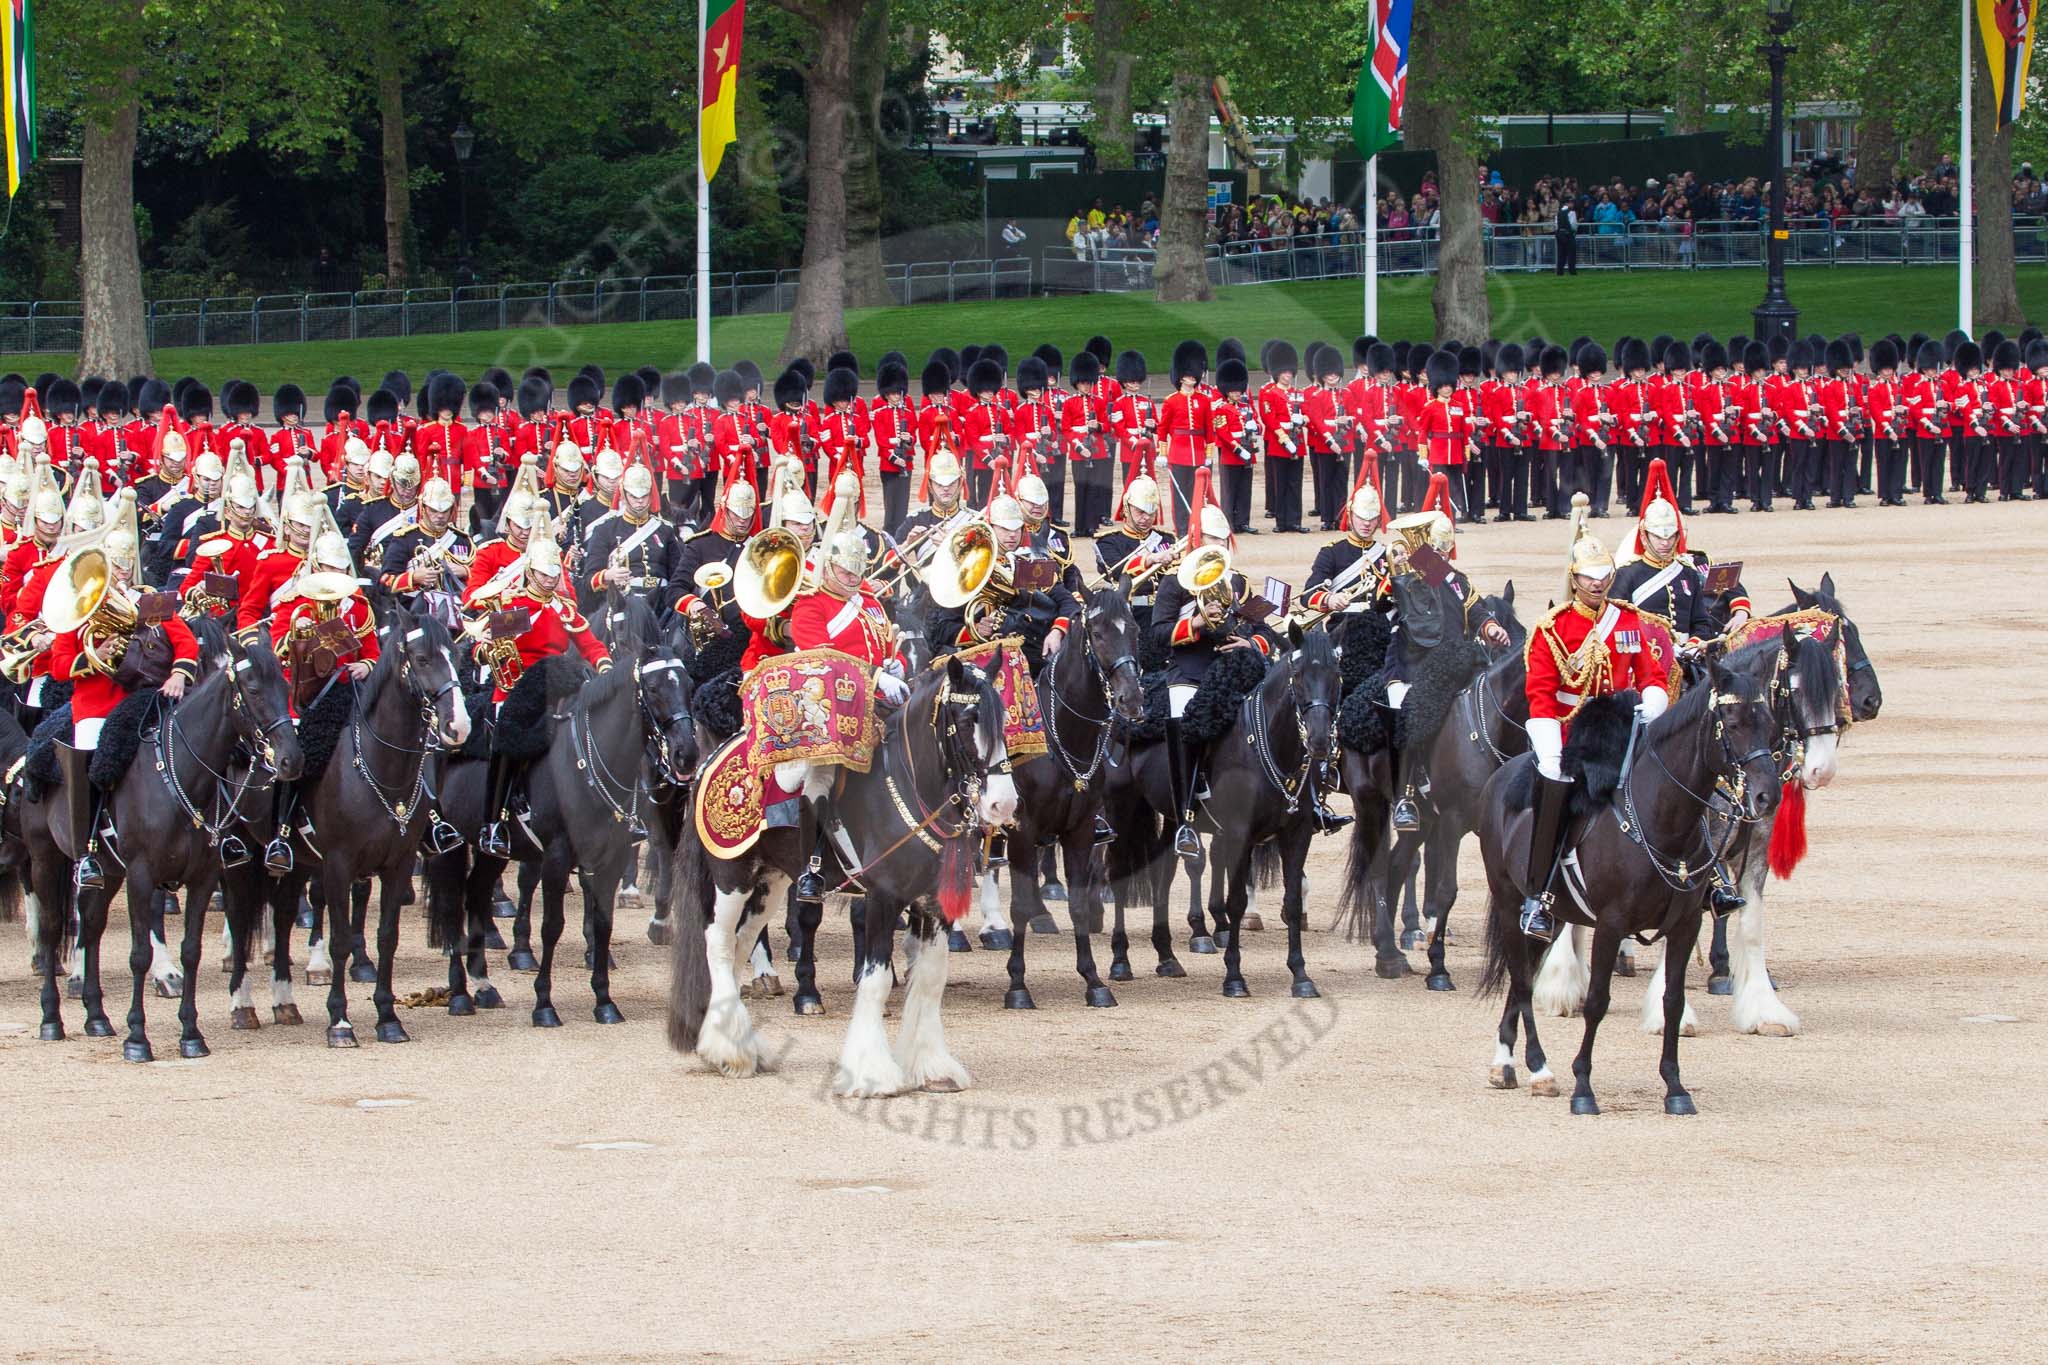 Major General's Review 2013: The Mounted Bands of the Household Cavalry during the Ride Past..
Horse Guards Parade, Westminster,
London SW1,

United Kingdom,
on 01 June 2013 at 11:57, image #659